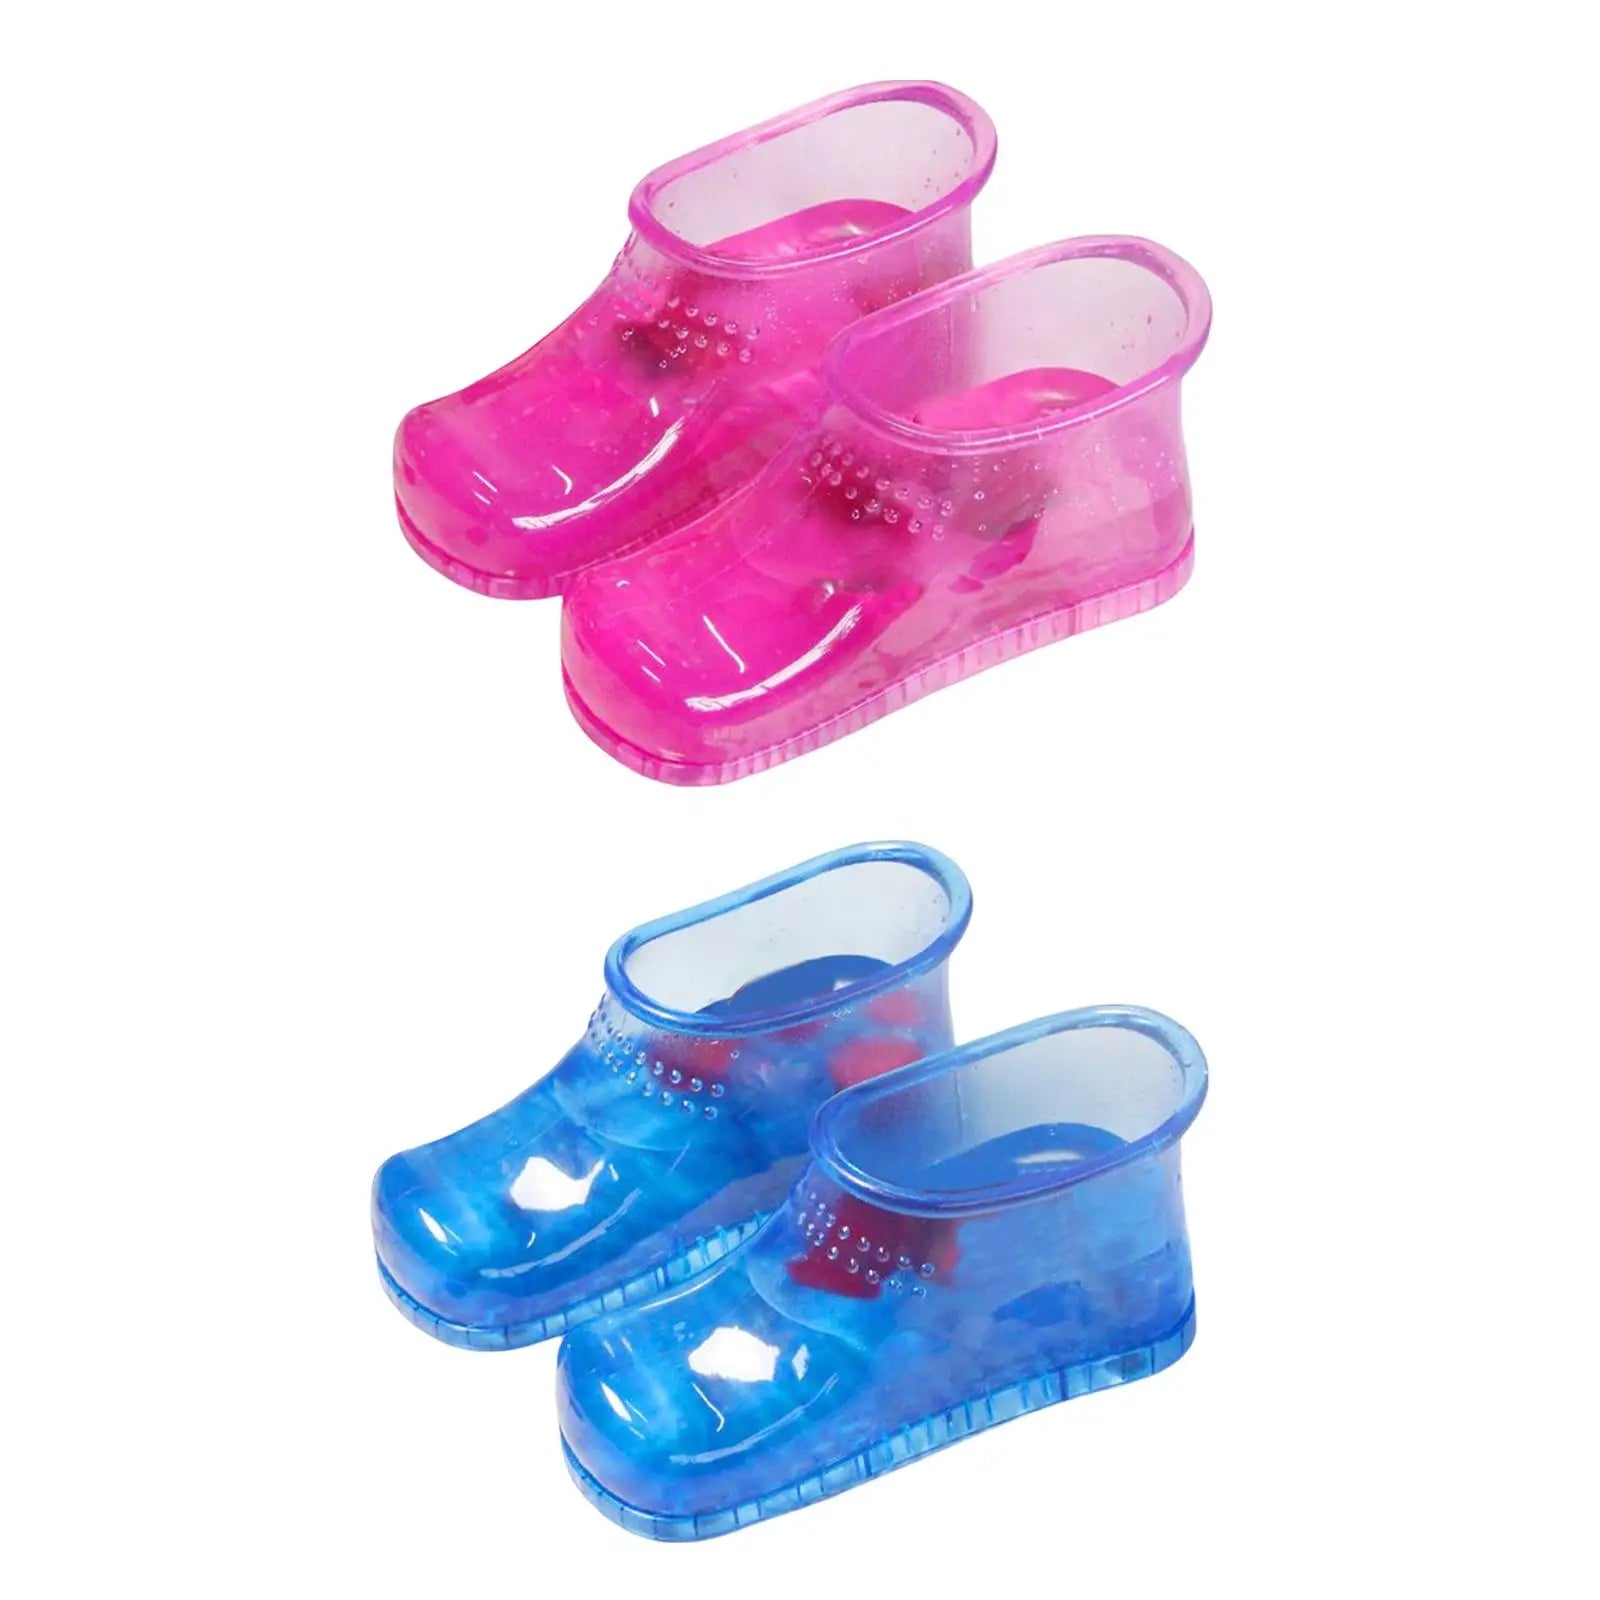 1 Pair Foot Bath Shoes Portable Foot Massage Non Slip for Foot SPA Feet Care